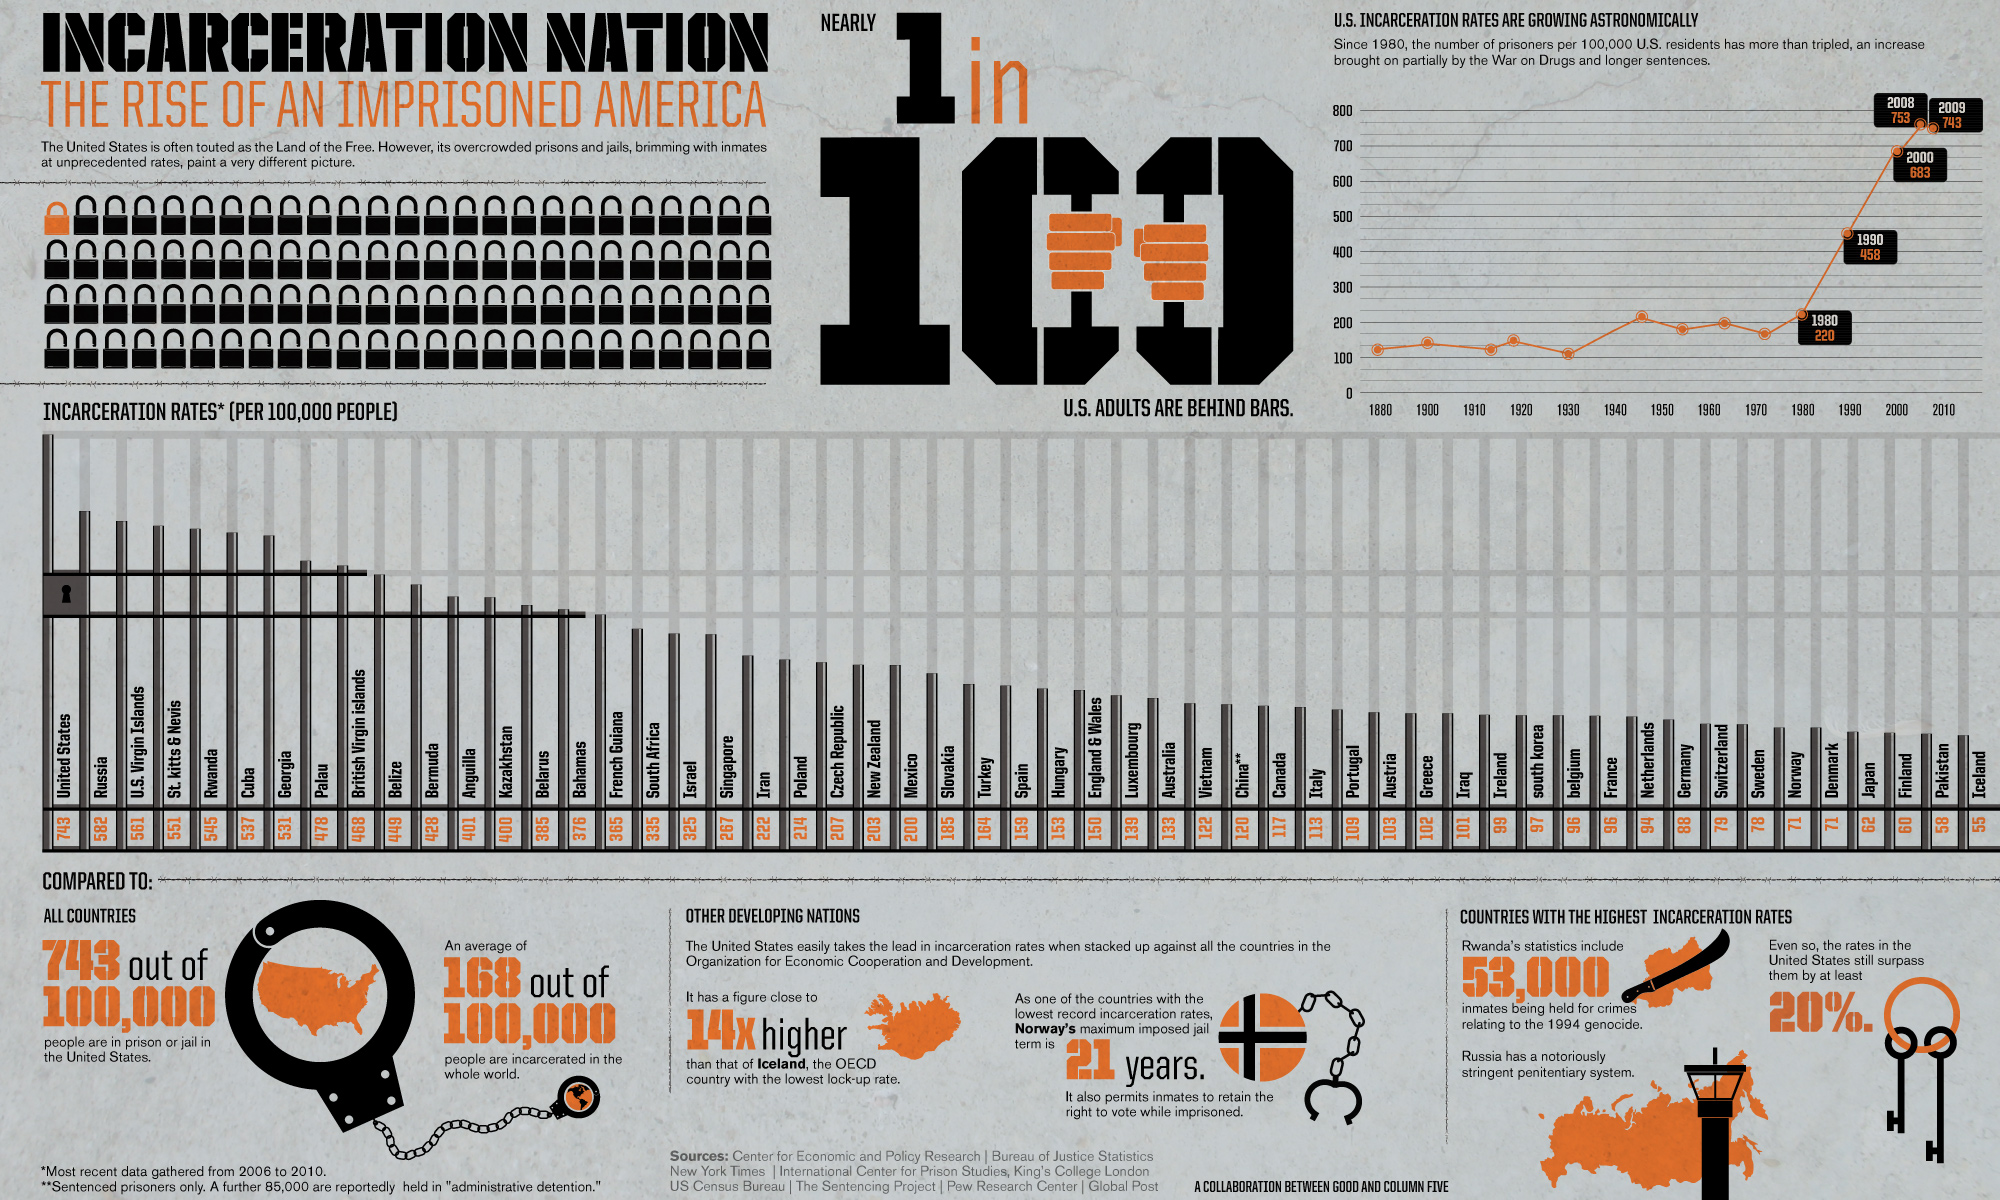 Infographic from Good. http://awesome.good.is/transparency/web/1102/incarcerate/flat.html